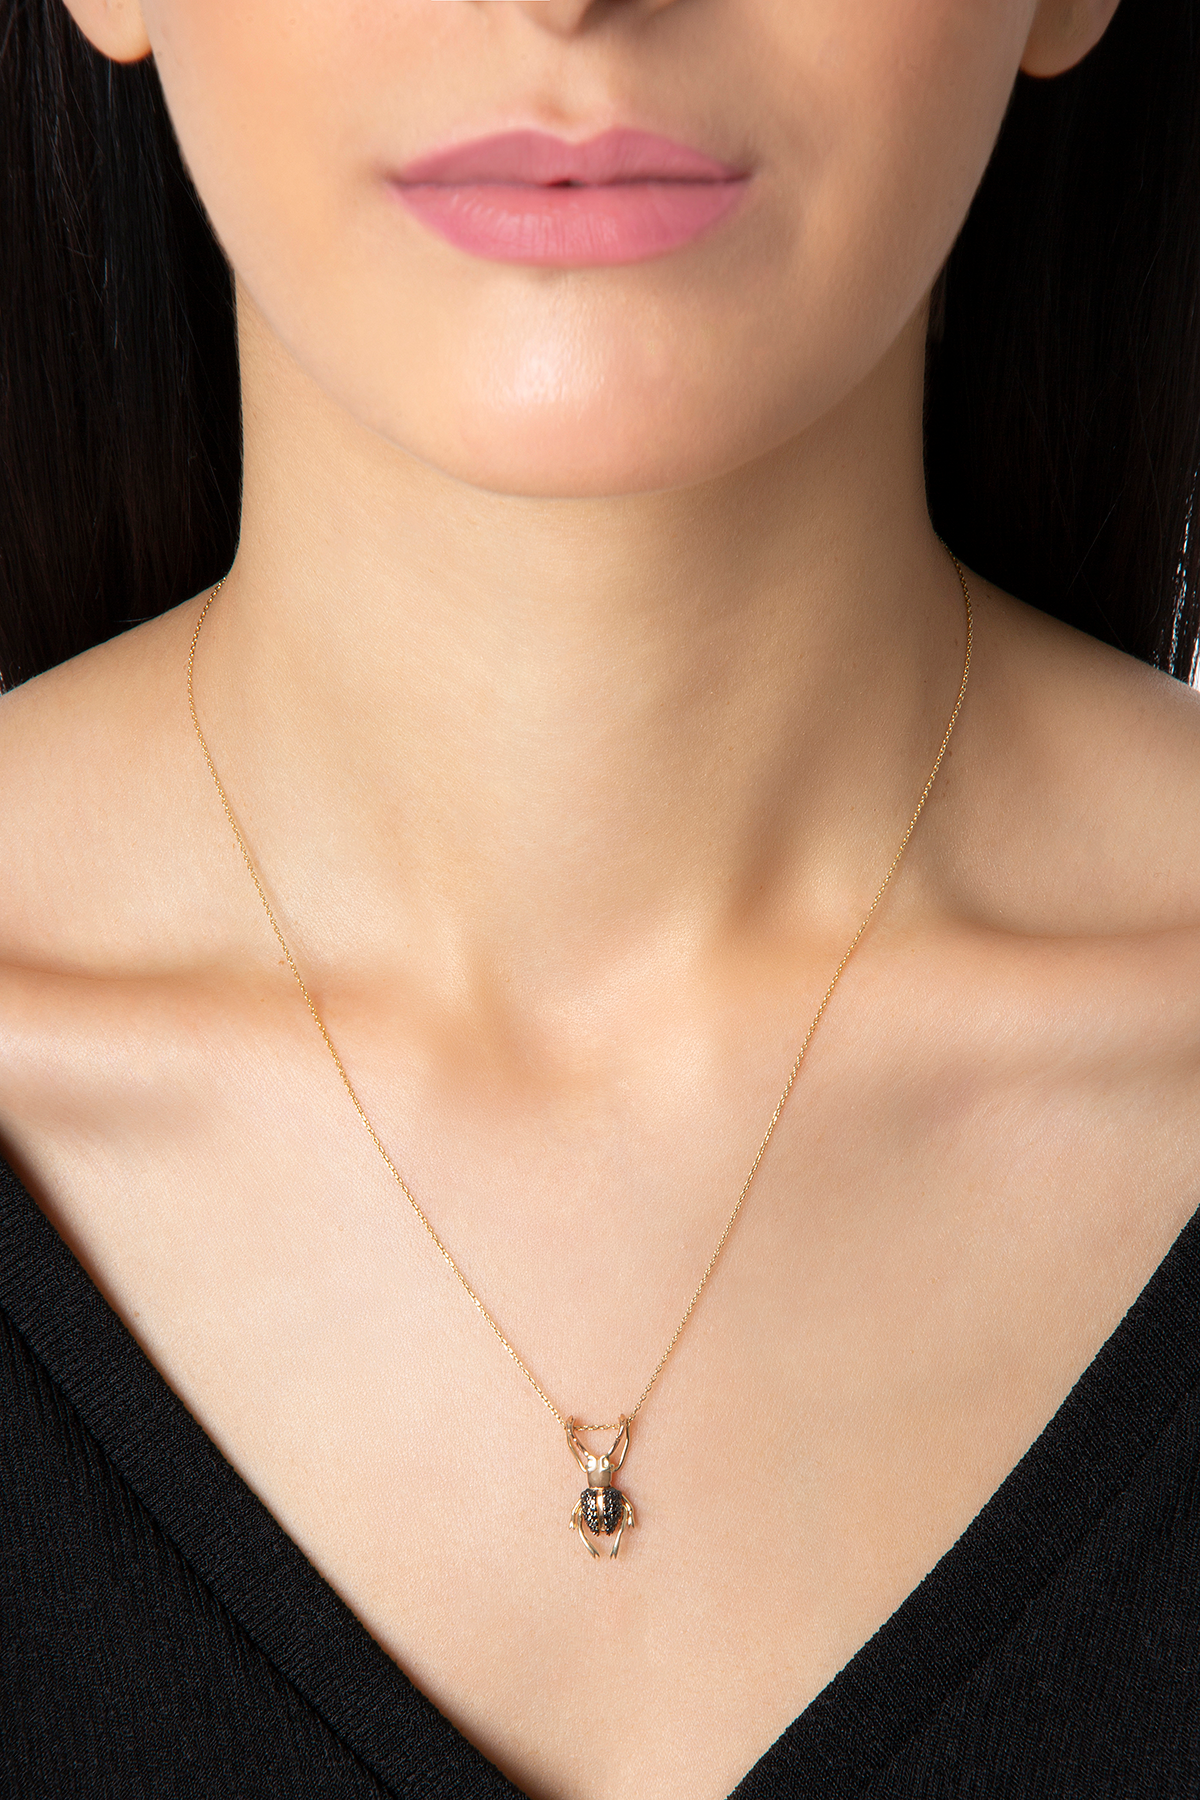 Stag Beetle Necklace in Yellow Gold - Her Story Shop